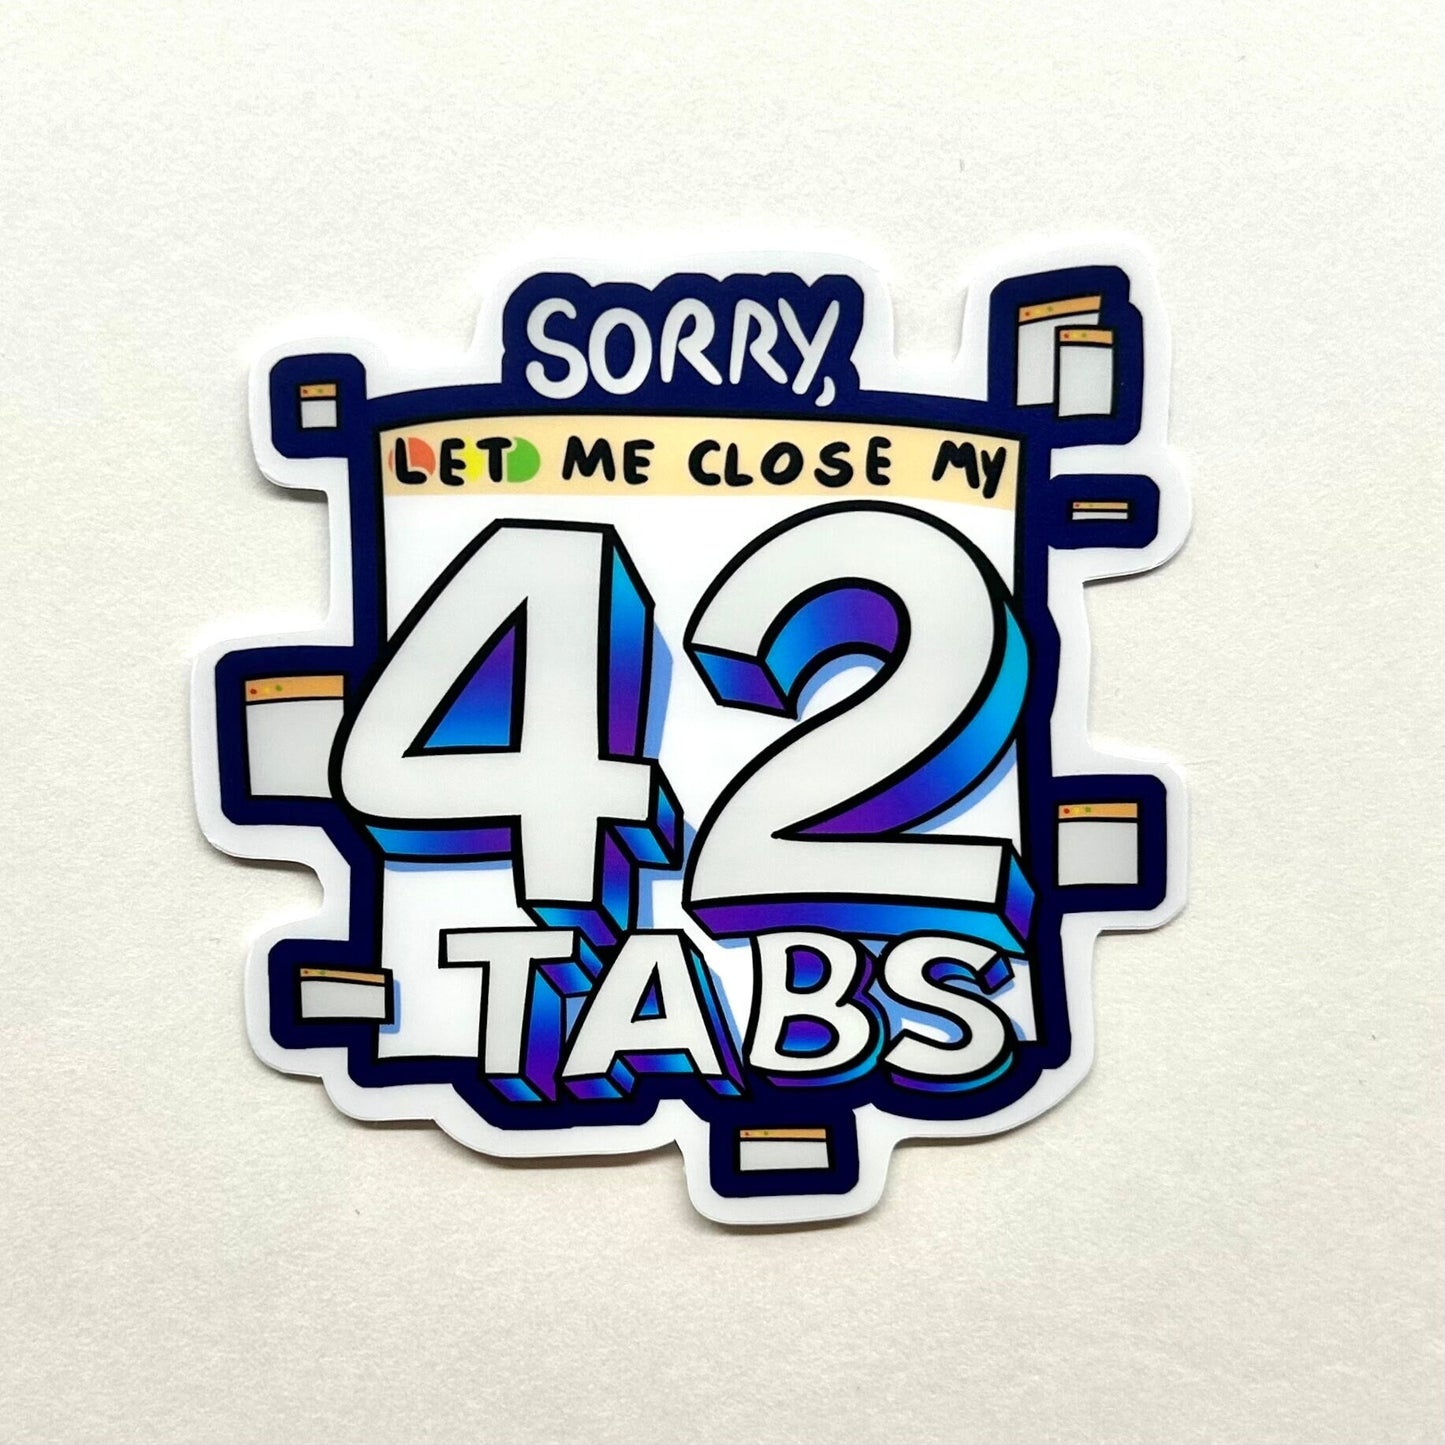 Let Me Close My 42 Tabs Funny Sticker - Perfect for Laptop Decor, Meme Enthusiasts, and Sticker Collectors